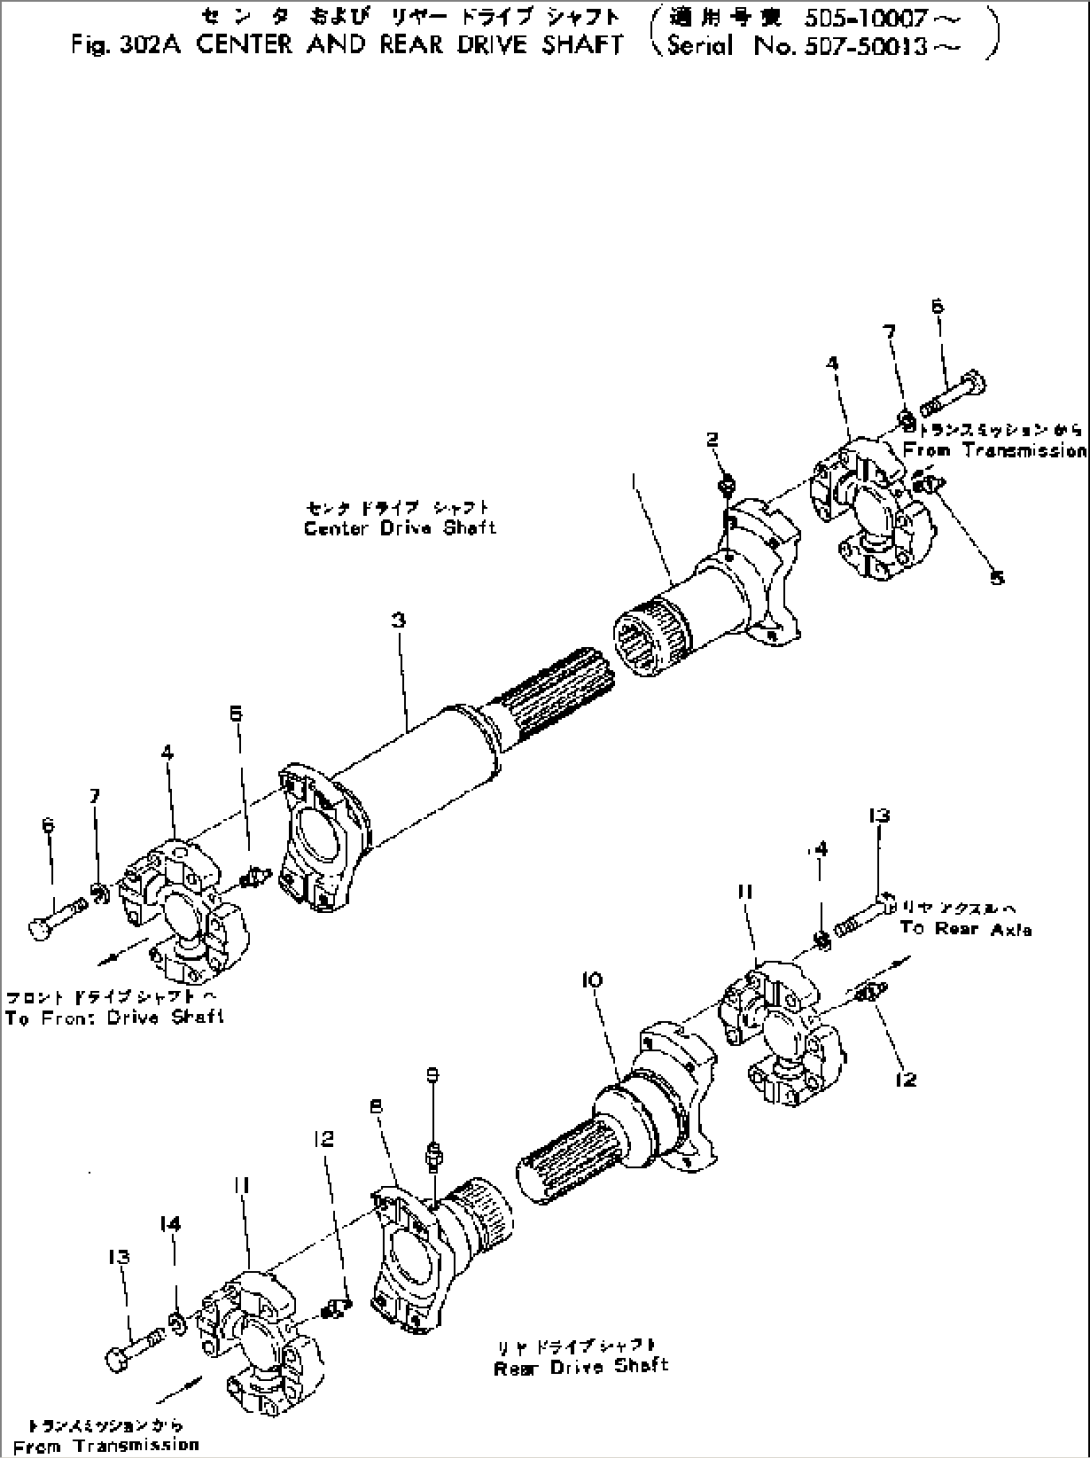 CENTER AND REAR DRIVE SHAFT(#10007-)